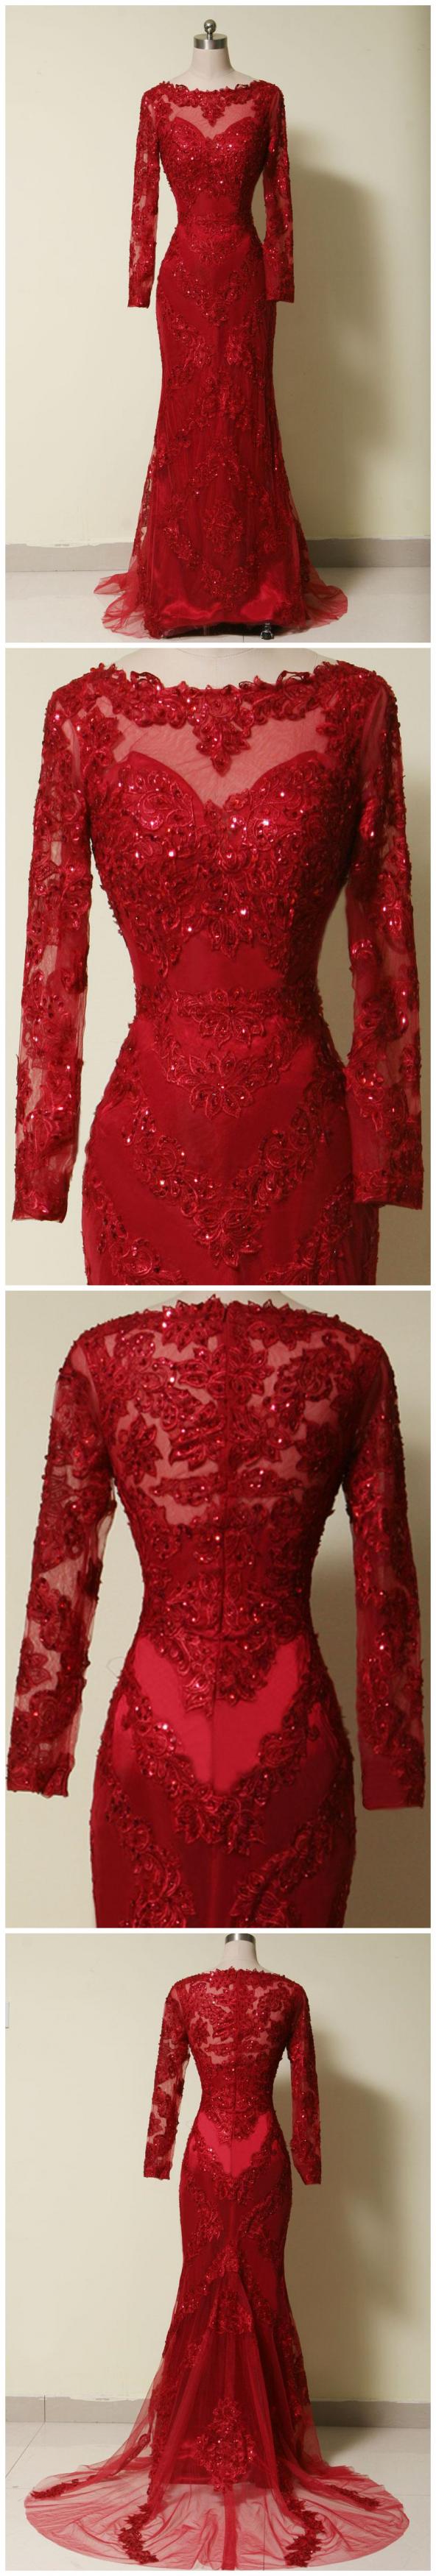 Elegant Long Sleeves Red Lace Mermaid Prom Dress 2017, Party Dress,evening Dress 2018